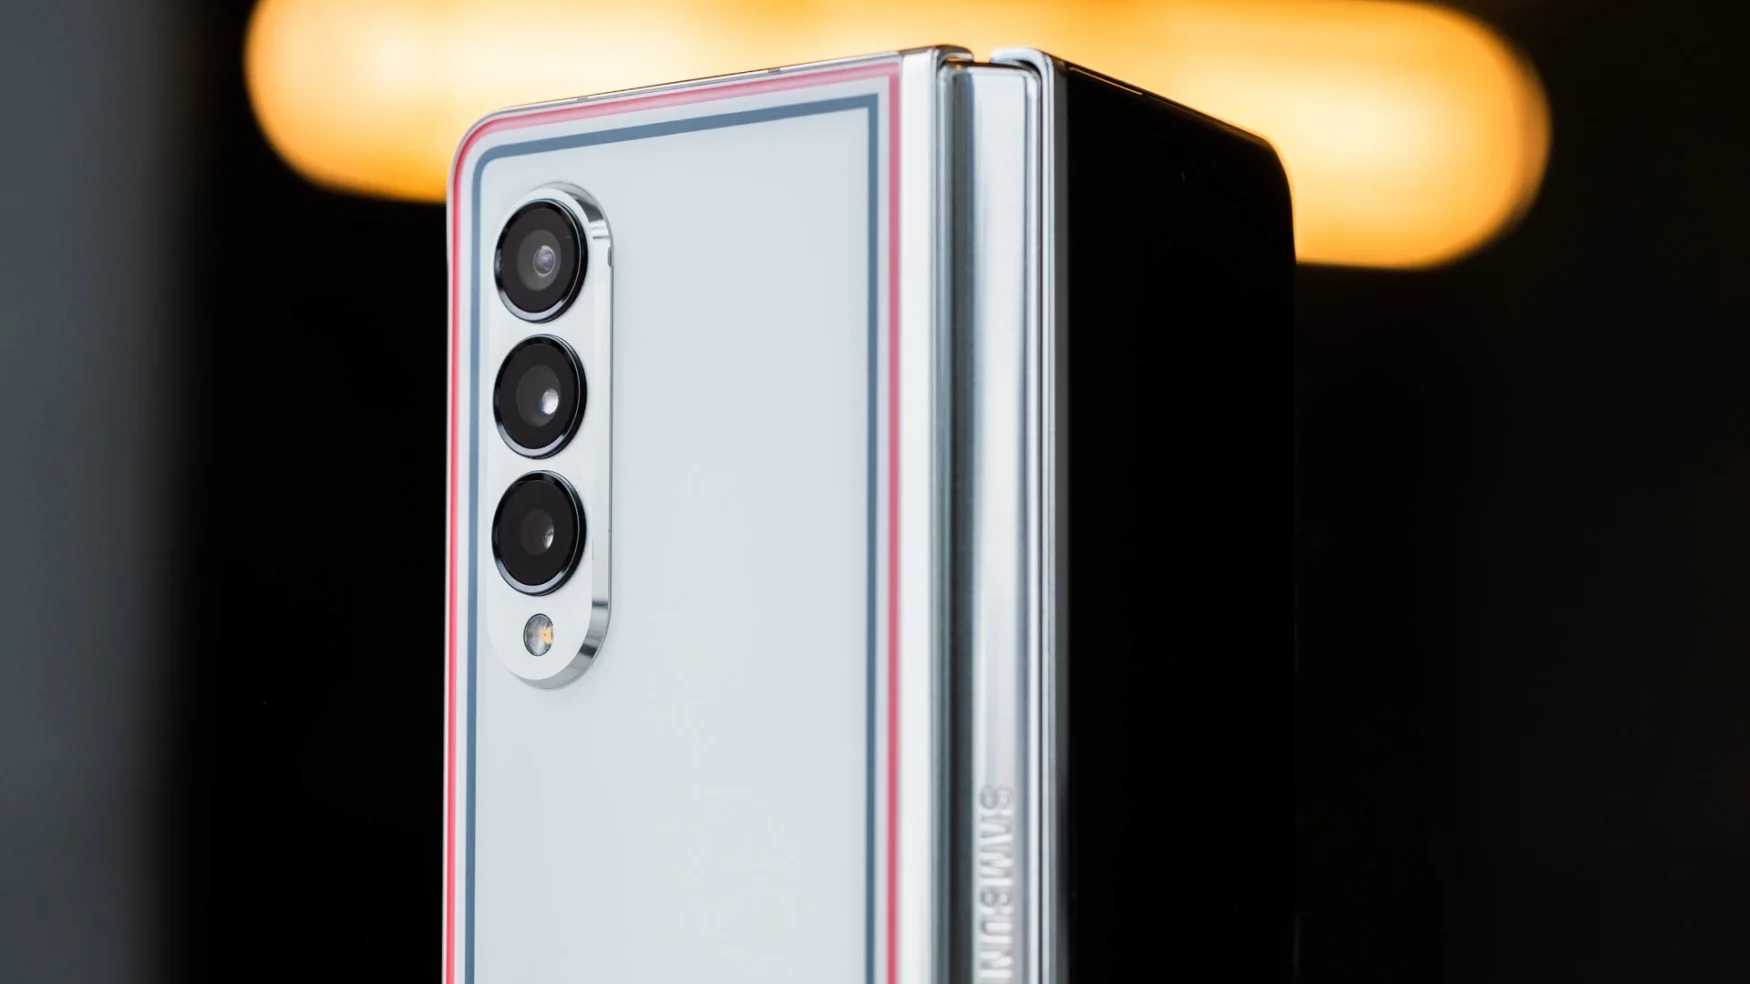 The Thom Browne edition of the Samsung Galaxy Z Fold half opened and with its back facing the camera.